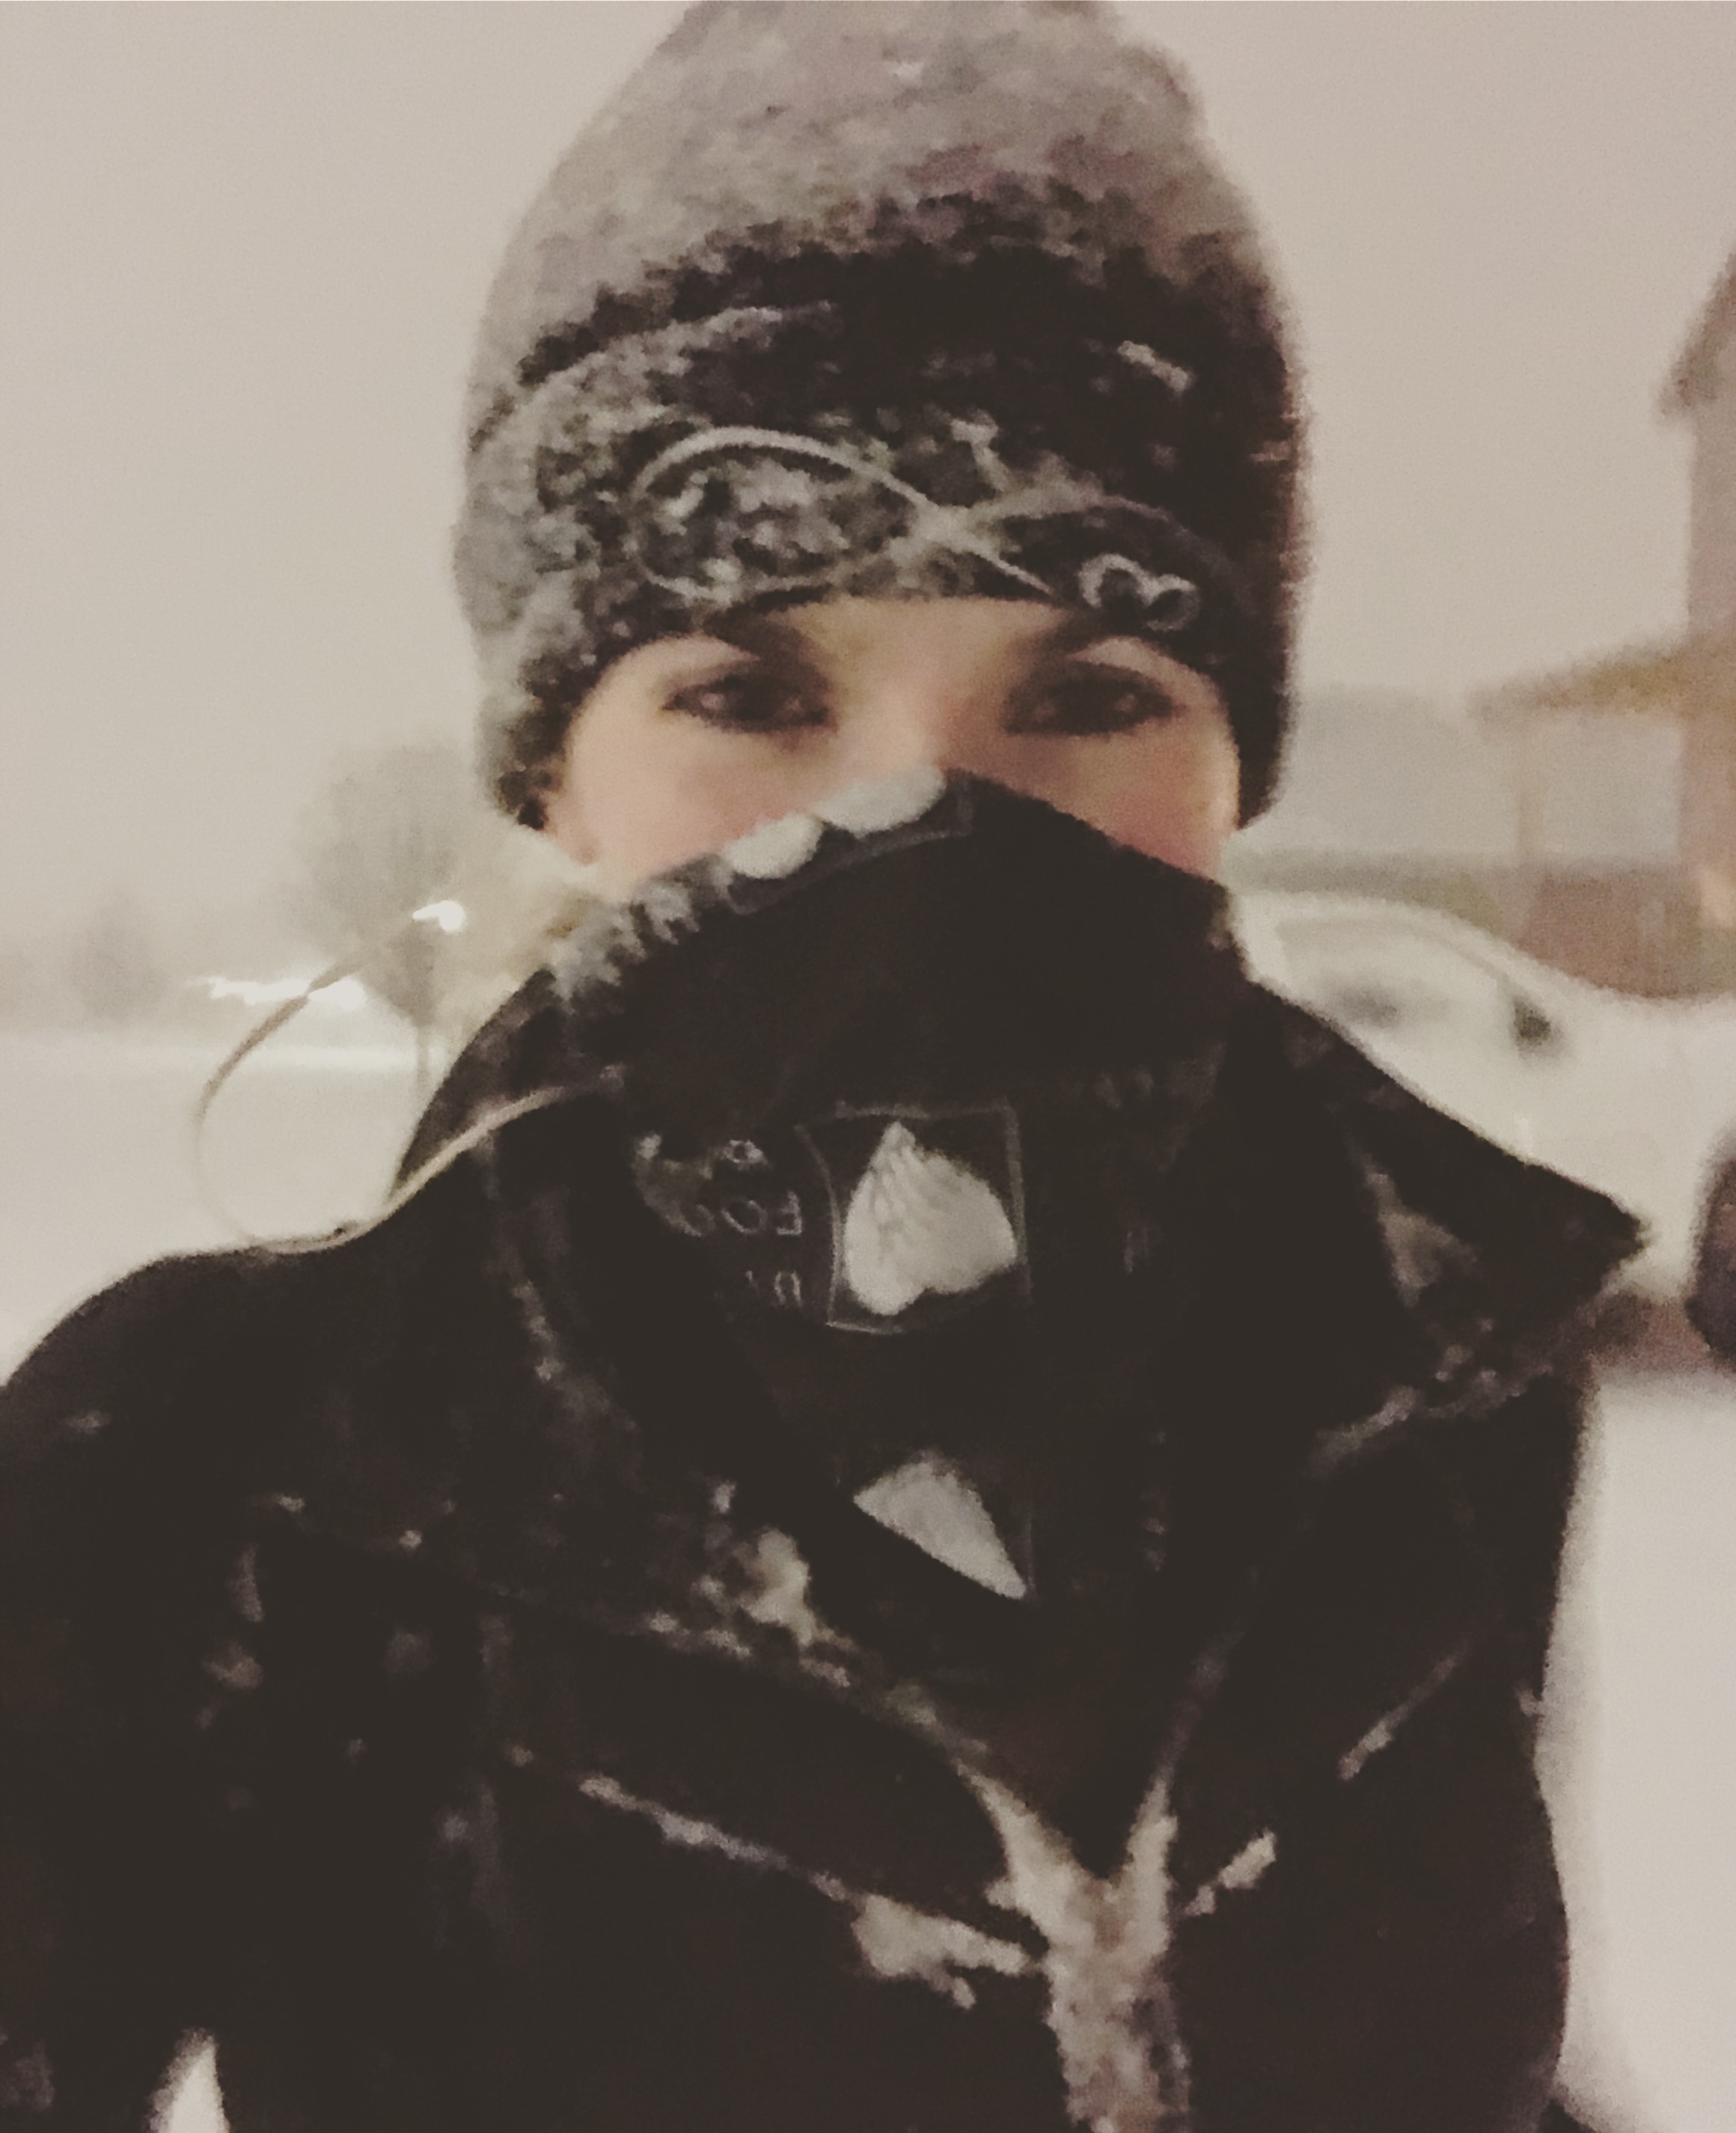 75 Hard Journey - Embracing the elements, running in a white out blizzard at 6AM